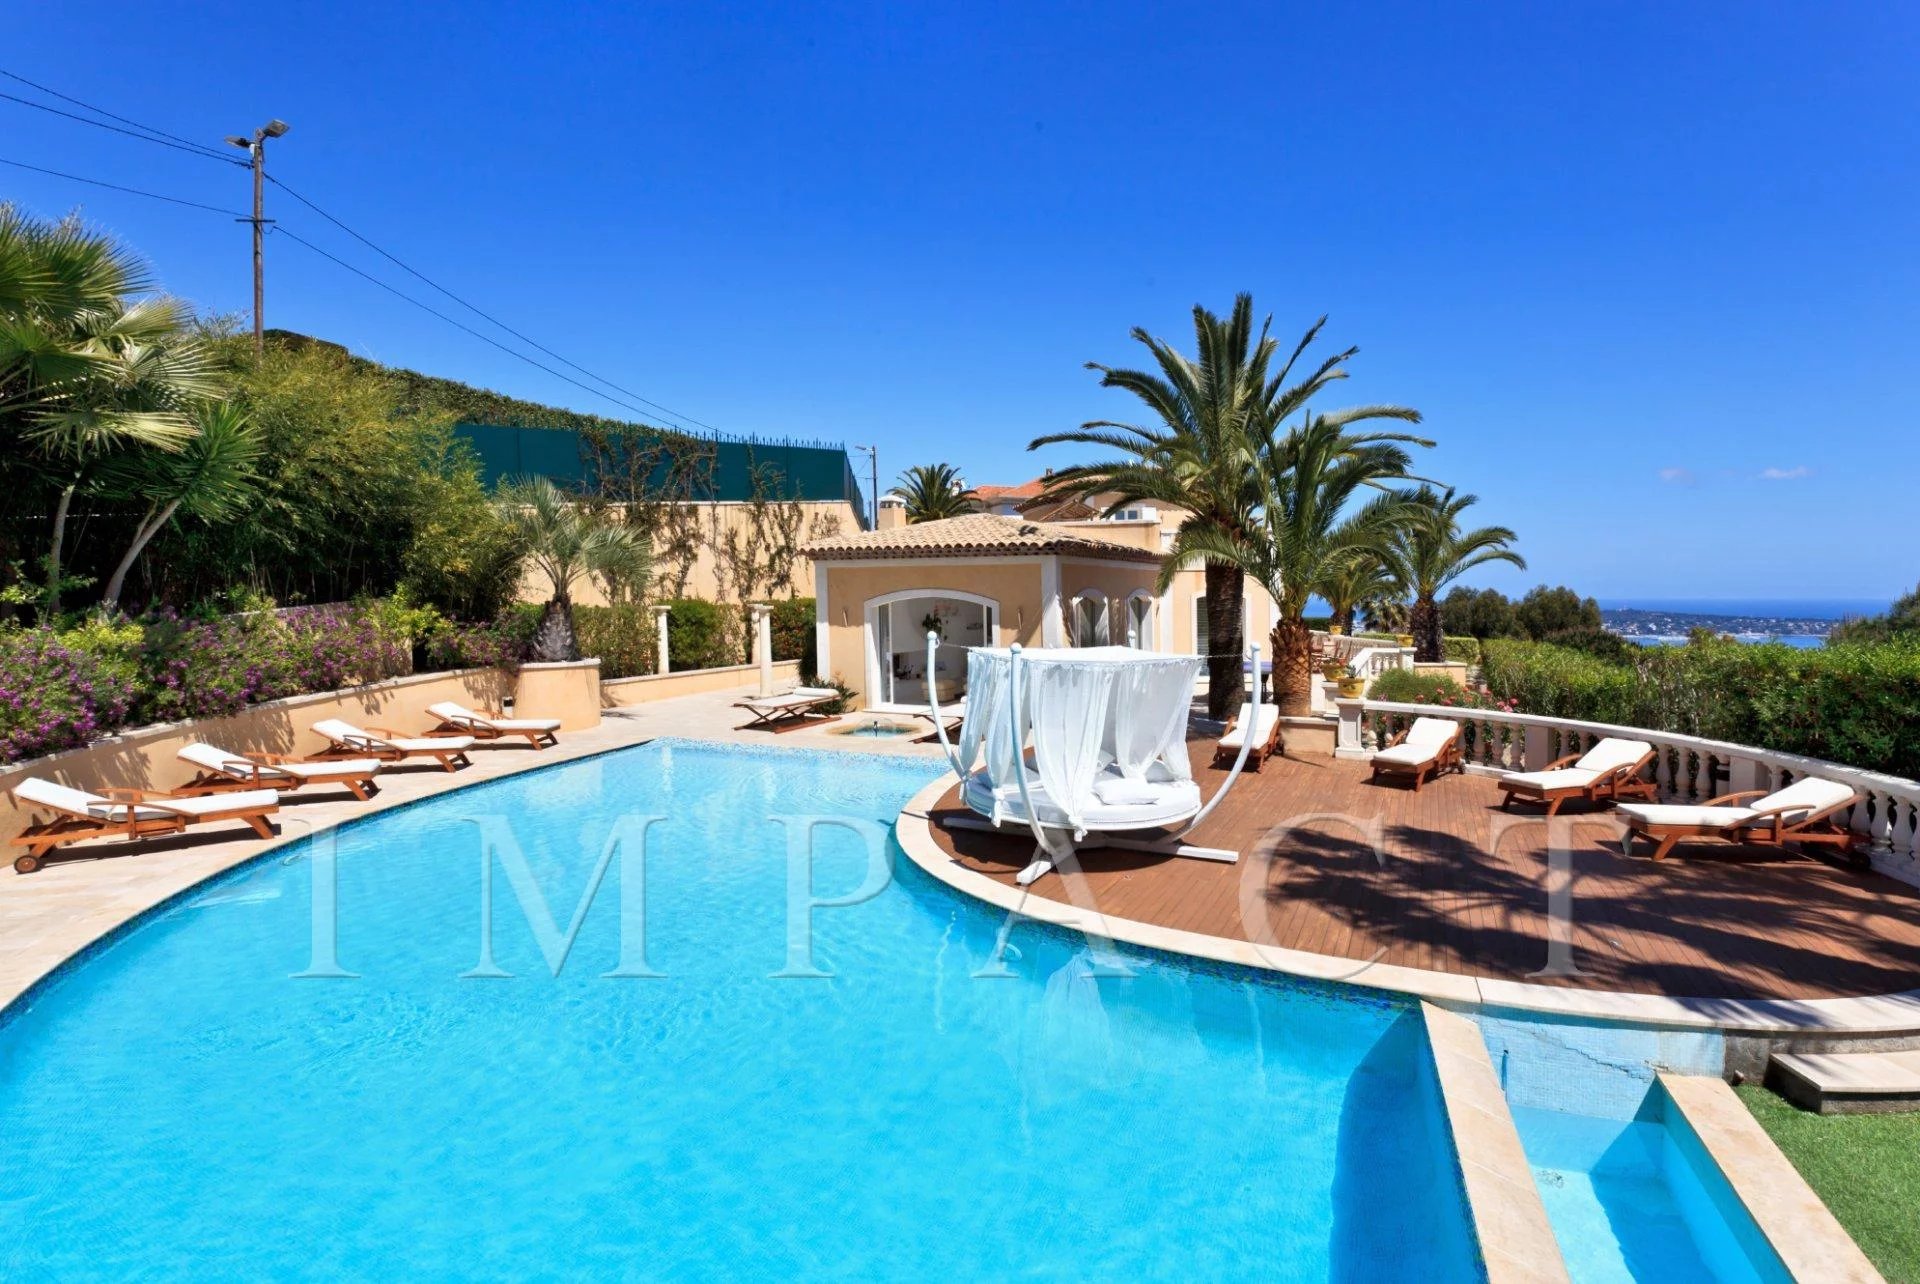 Villa in Cannes for rent sea view